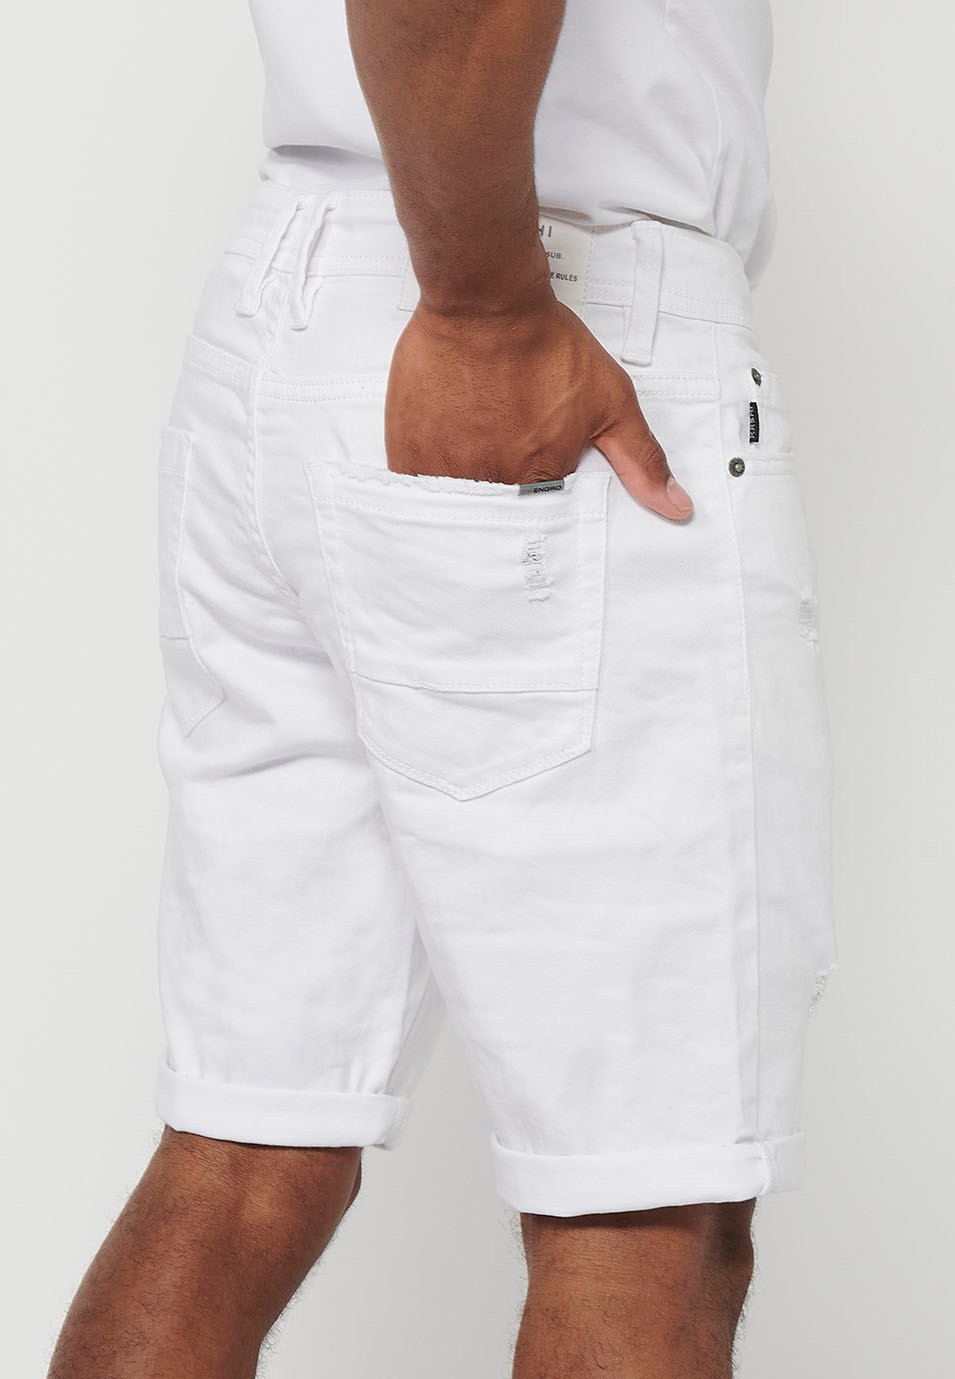 Denim Bermuda shorts with turn-up finish and front closure with zipper and button in White for Men 2